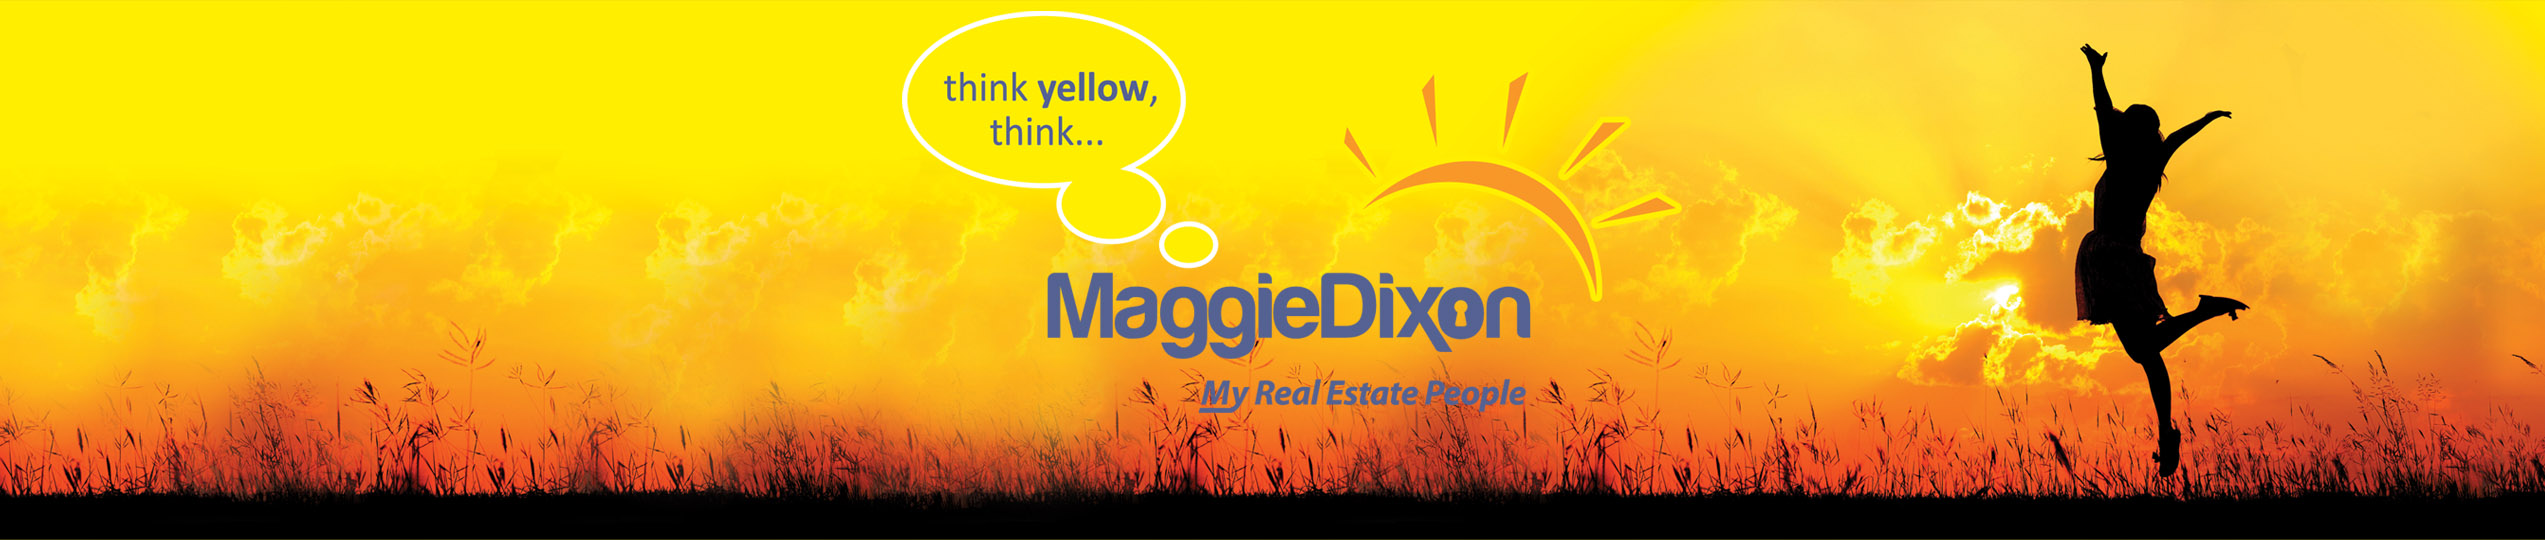 think yellow, think maggie dixon my real estate people. Girl's silhouette jumping as the sun sets